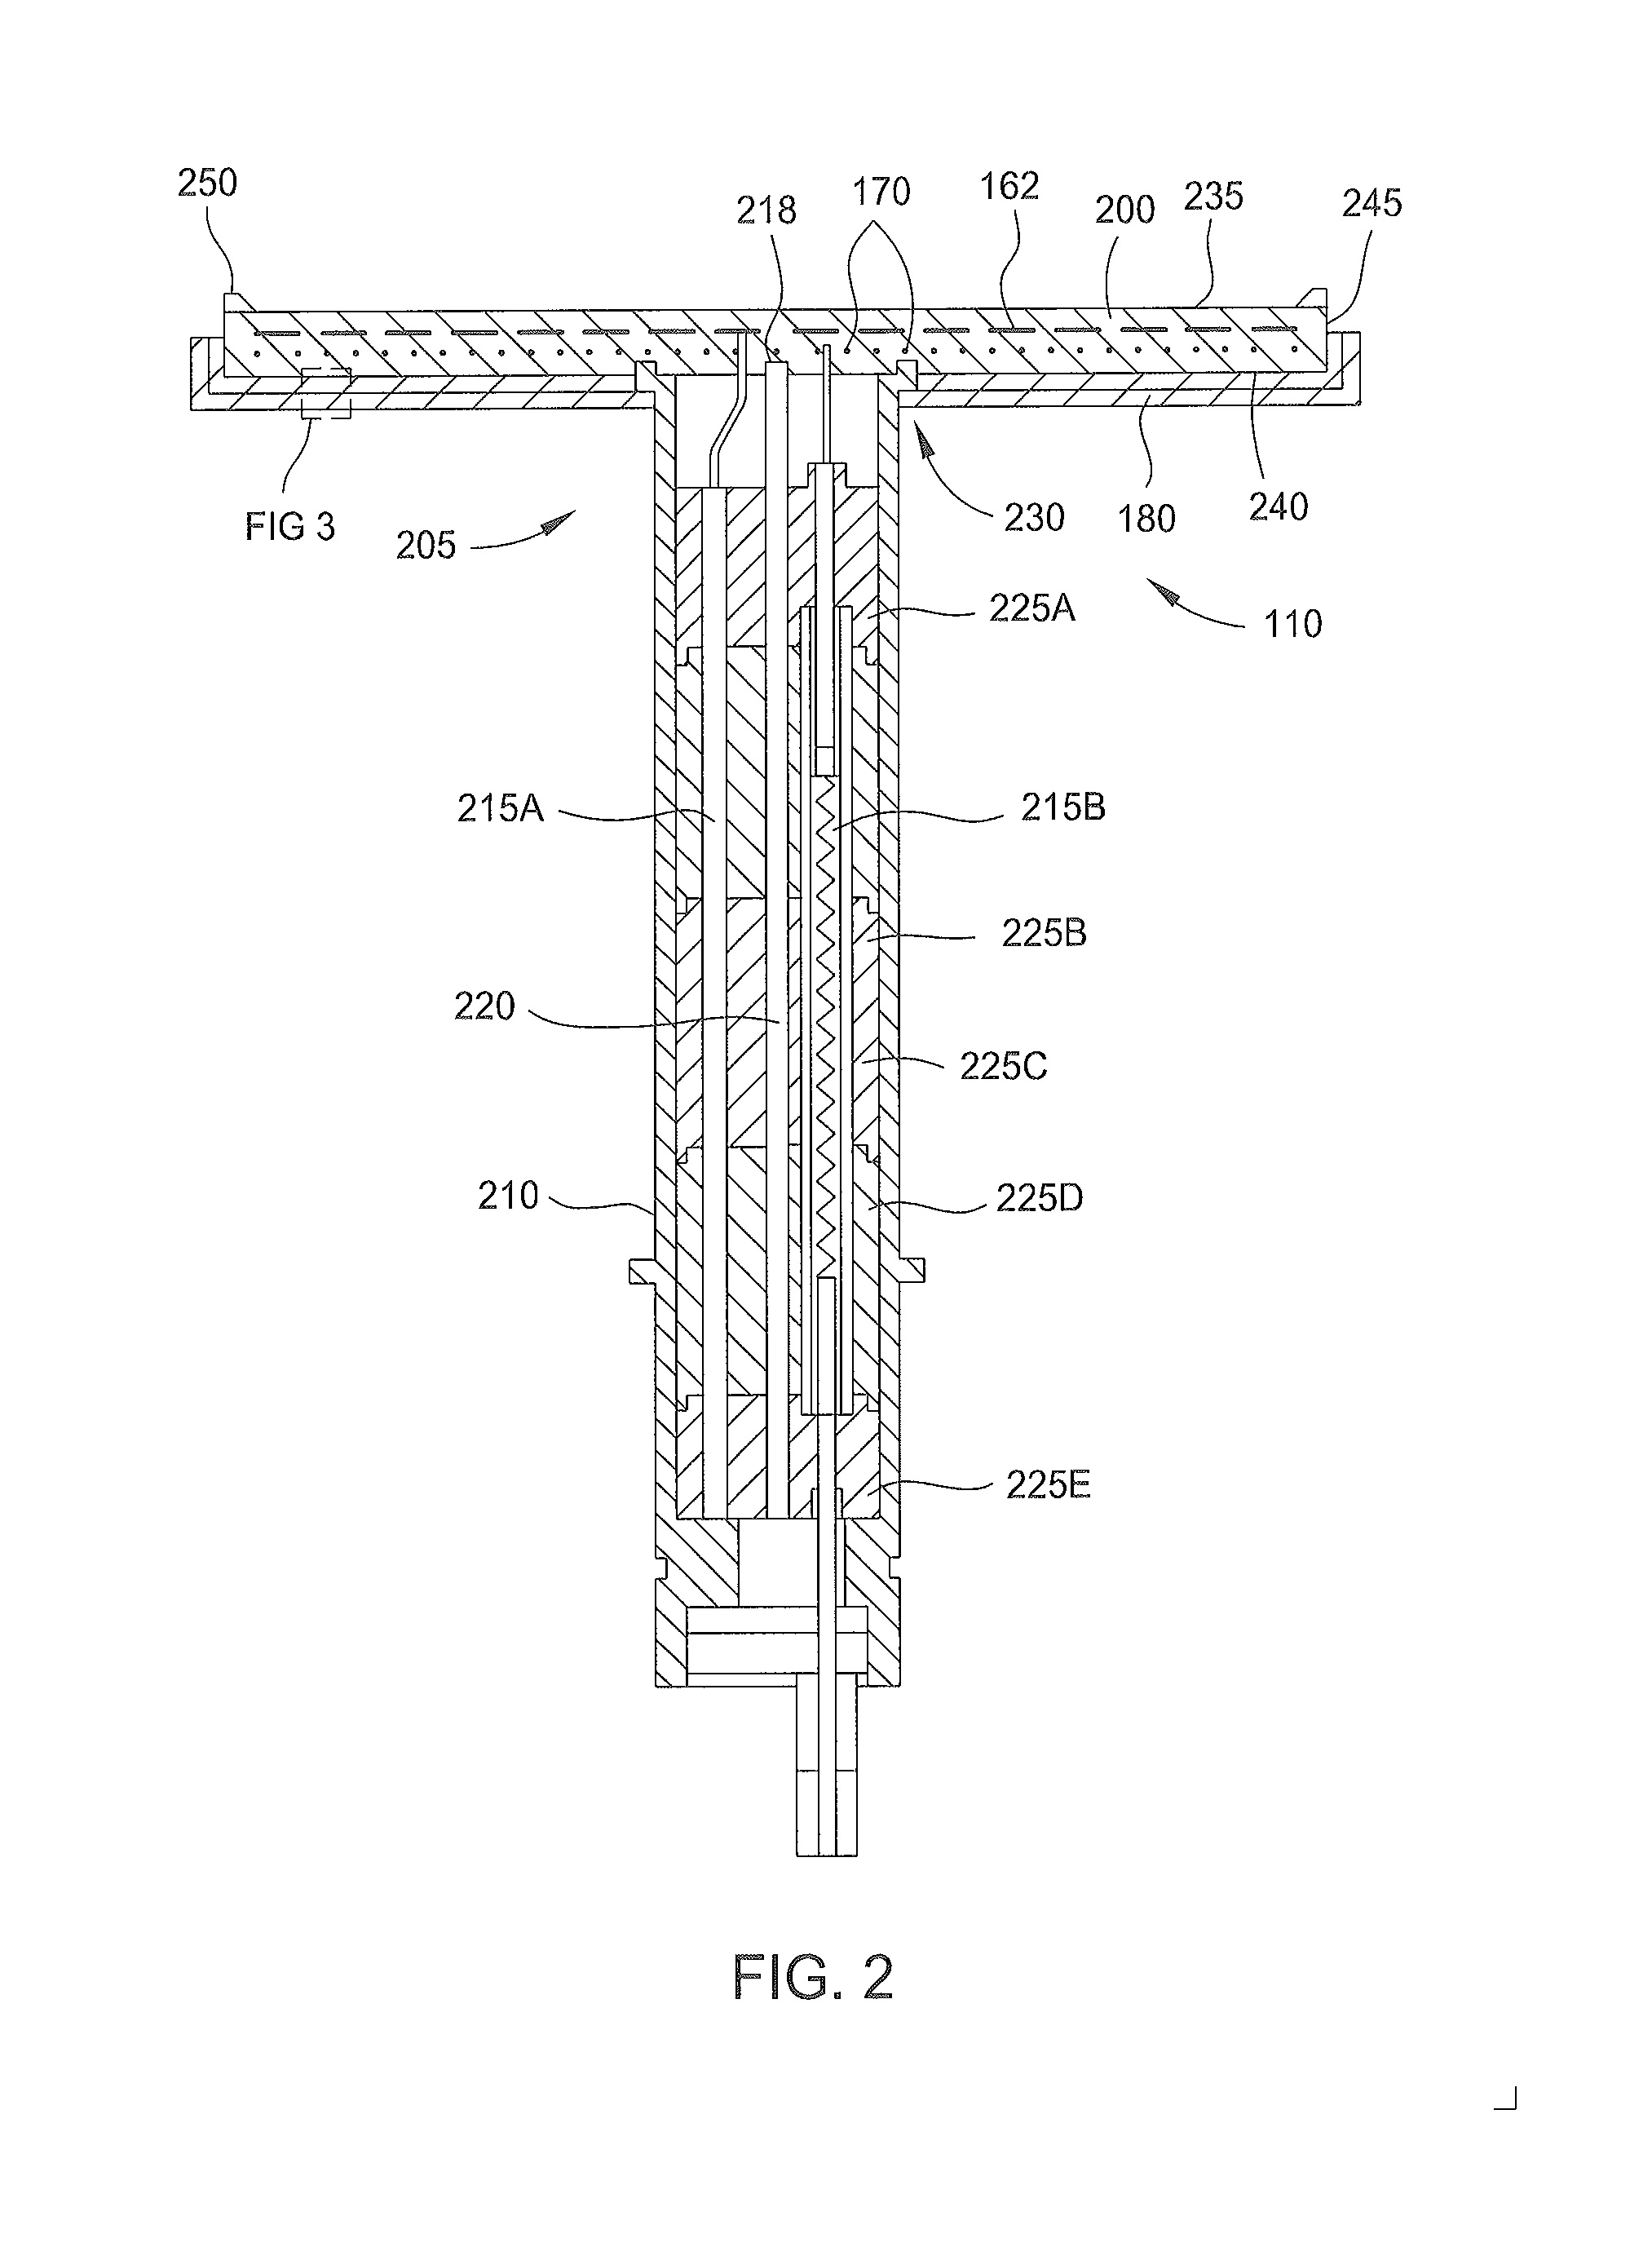 Thermal radiation barrier for substrate processing chamber components